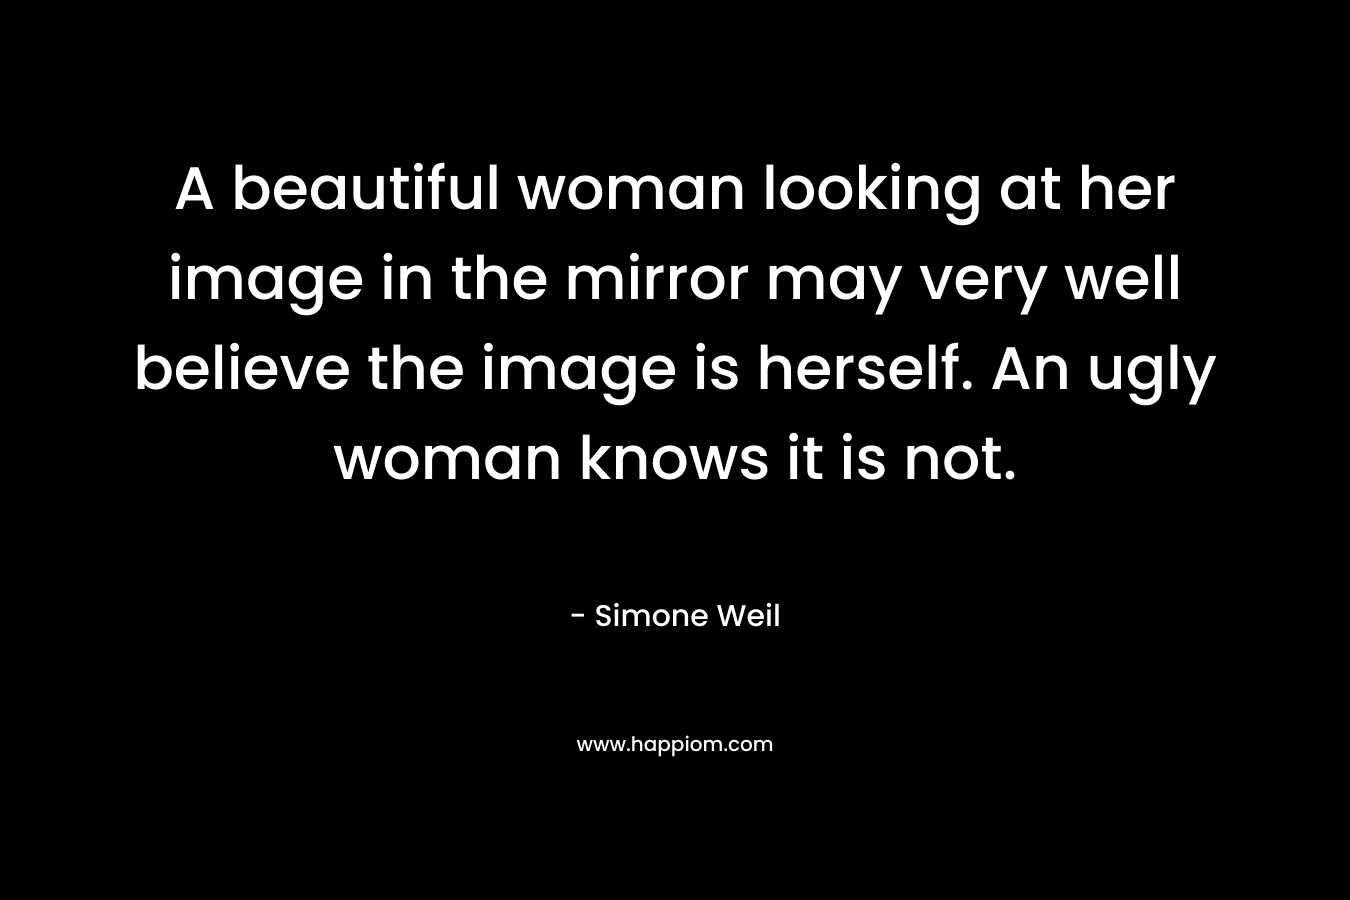 A beautiful woman looking at her image in the mirror may very well believe the image is herself. An ugly woman knows it is not.